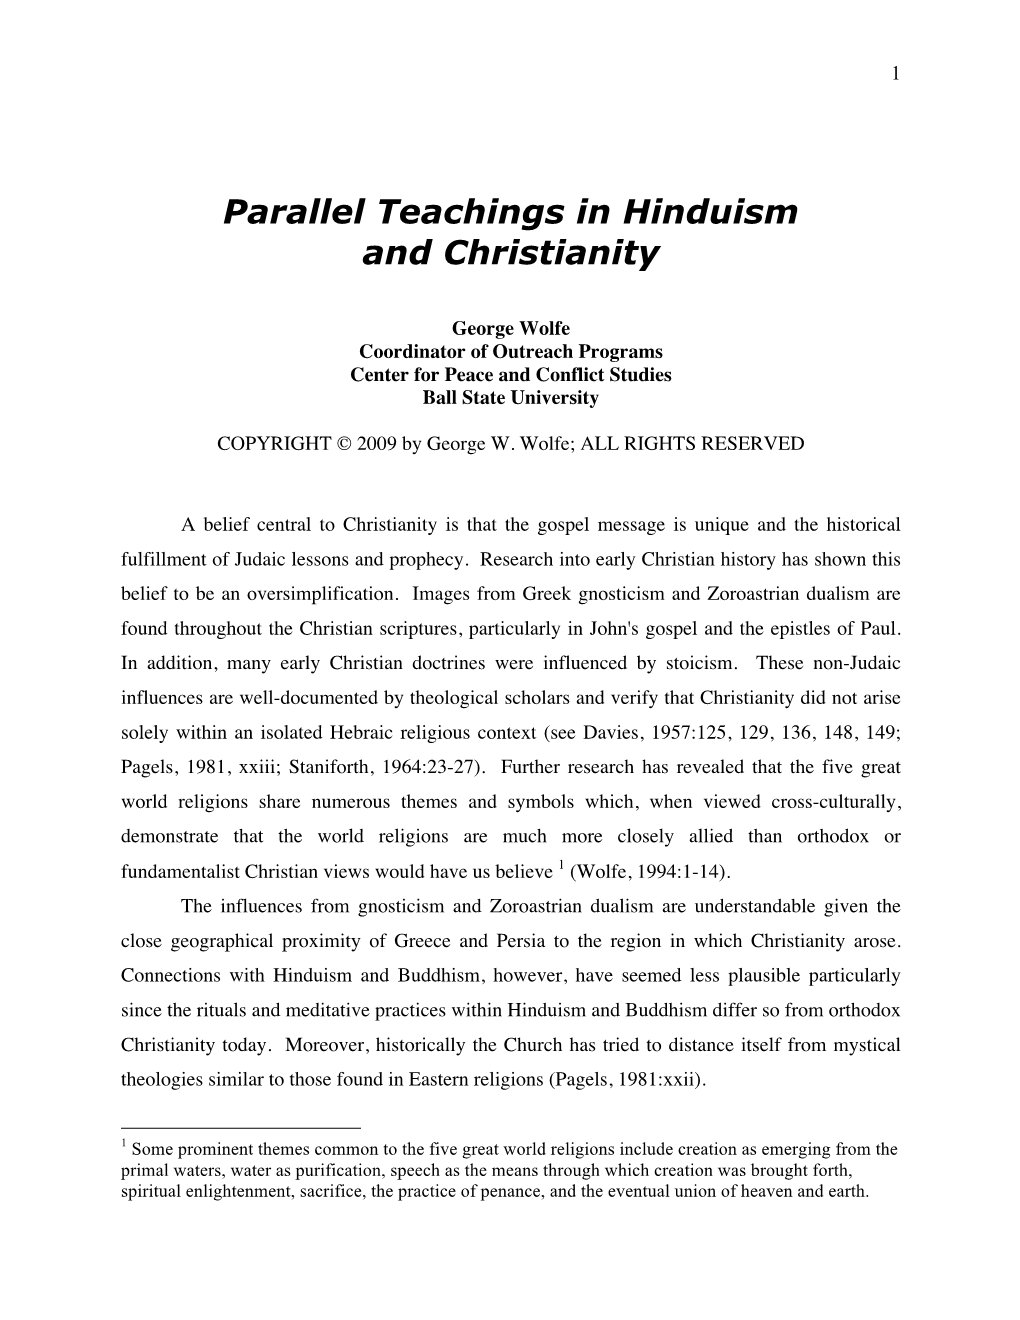 Parallel Teachings in Hinduism and Christianity